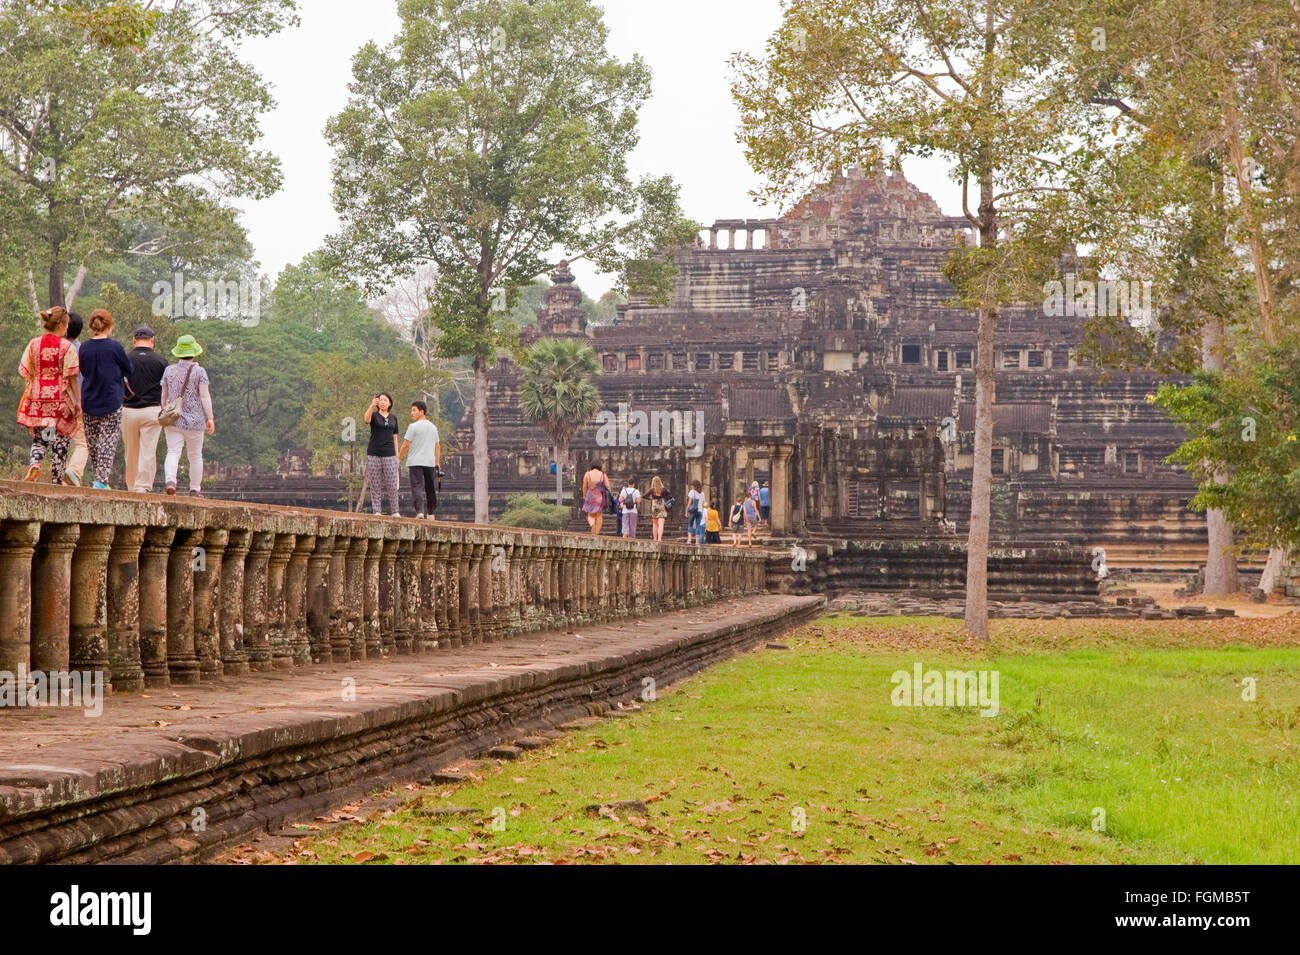 Tourists on the raised walkway to the ruins in Siem Reap, Cambodia Stock Photo